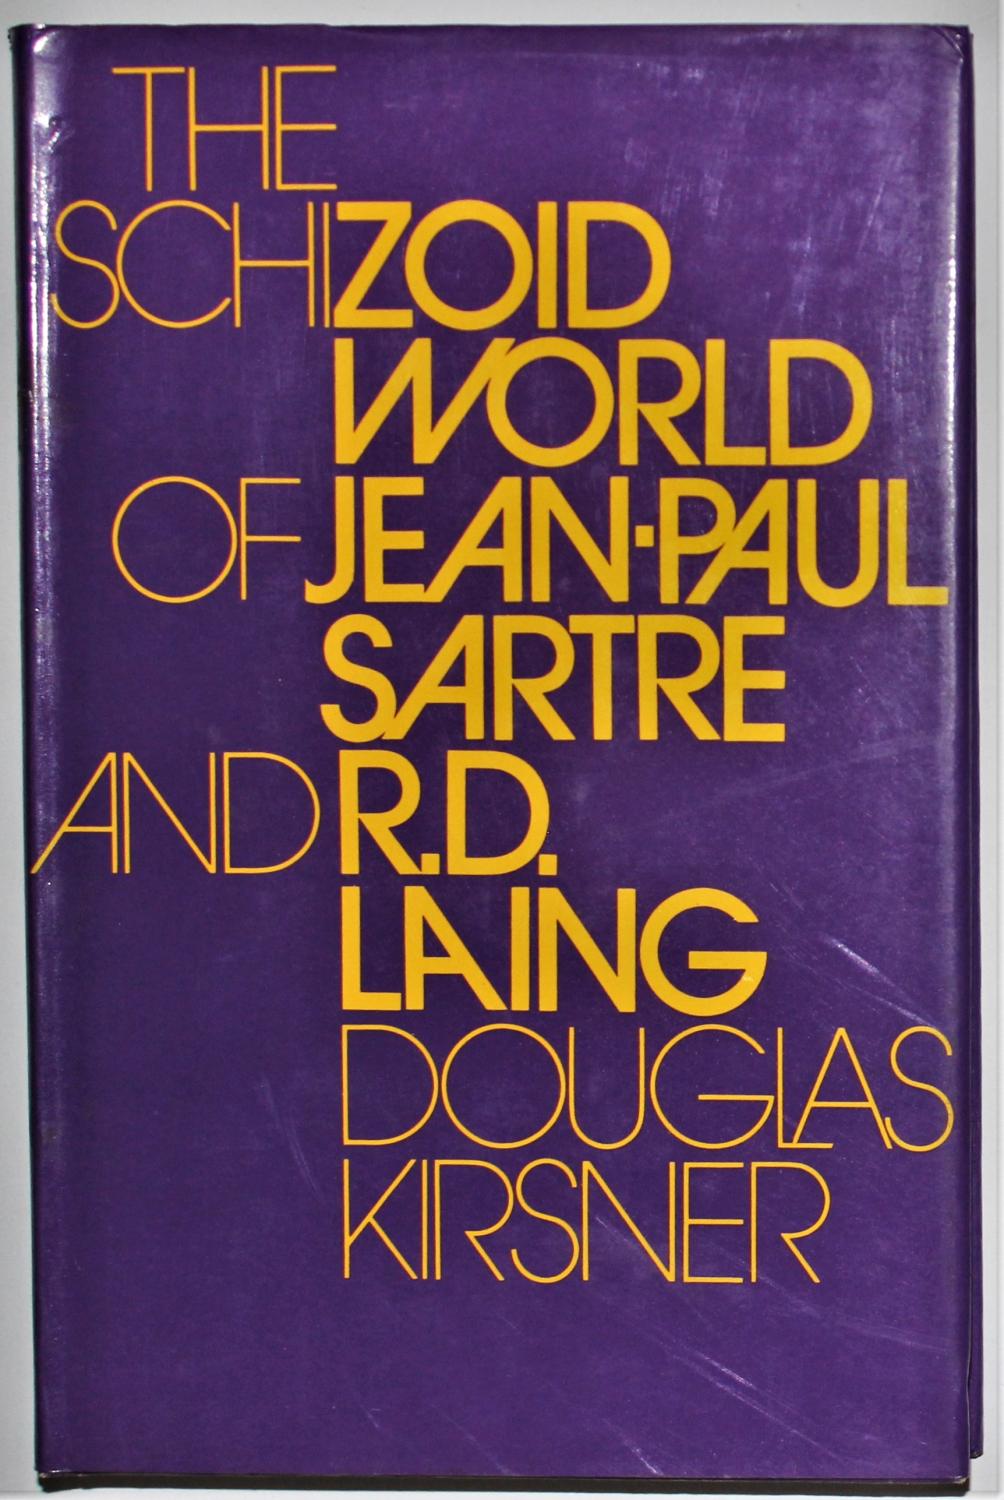 The Schizoid World of Jean-Paul Sartre and R.D. Laing - Kirsner, Douglas